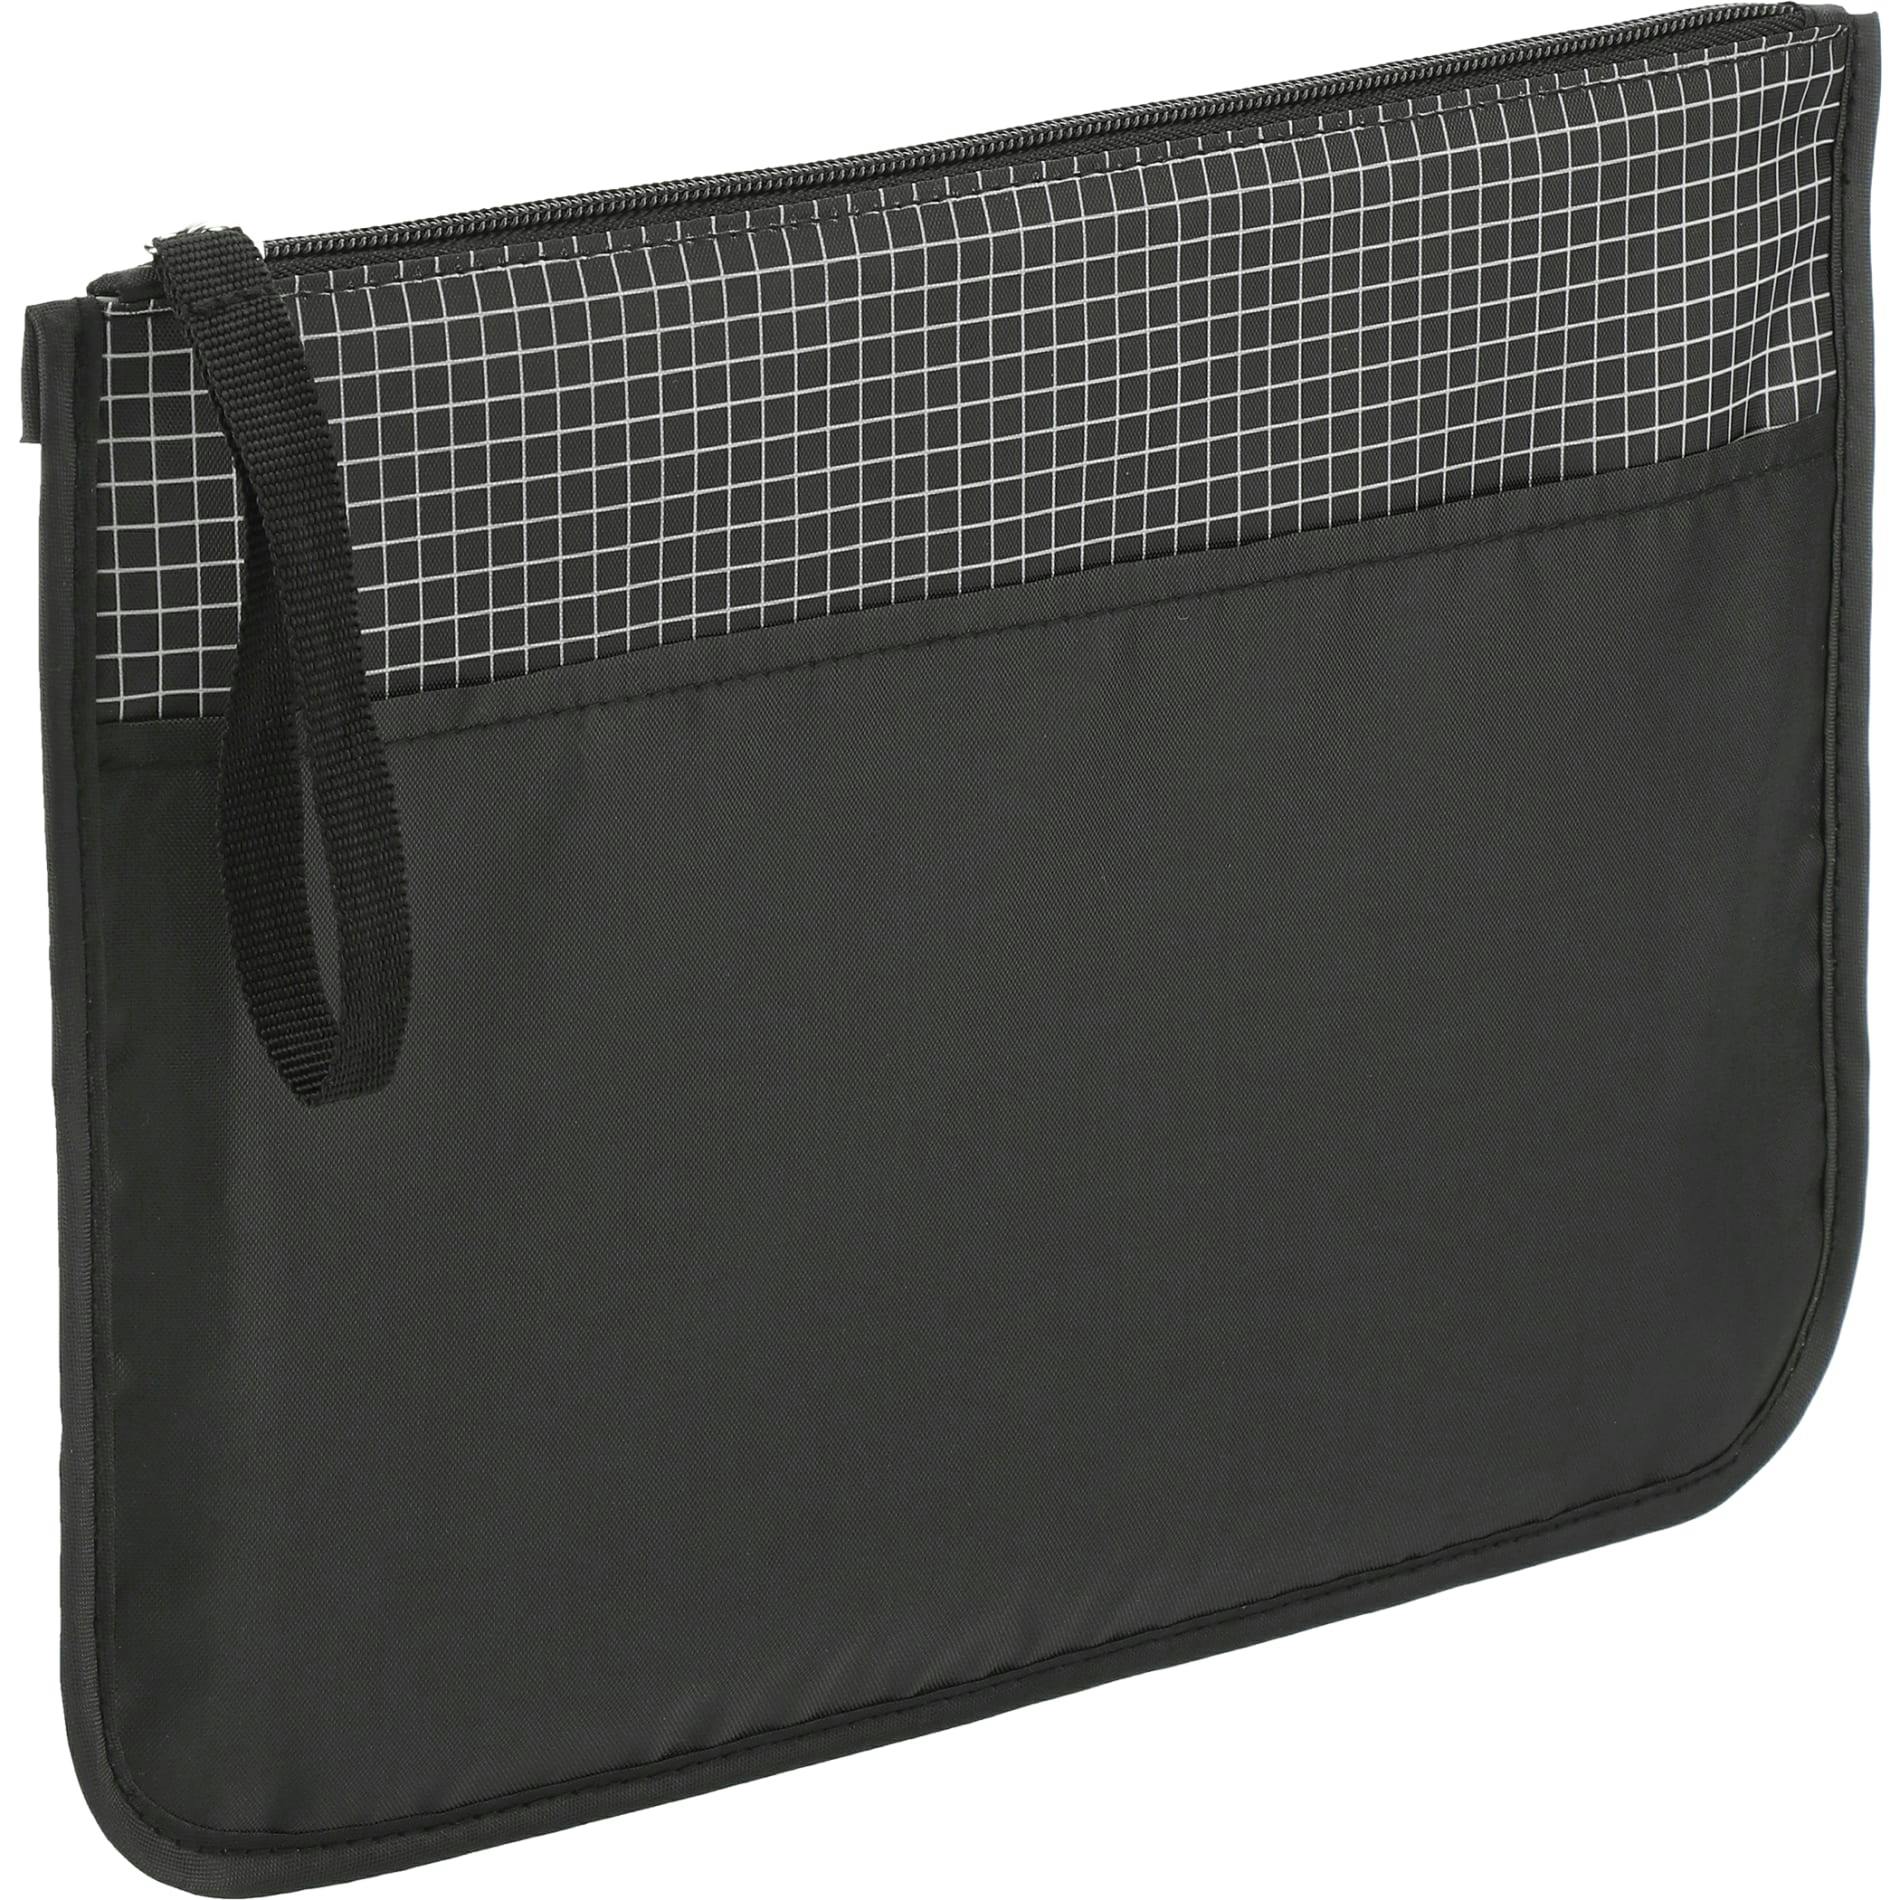 Grid Wet Dry Pouch - additional Image 4